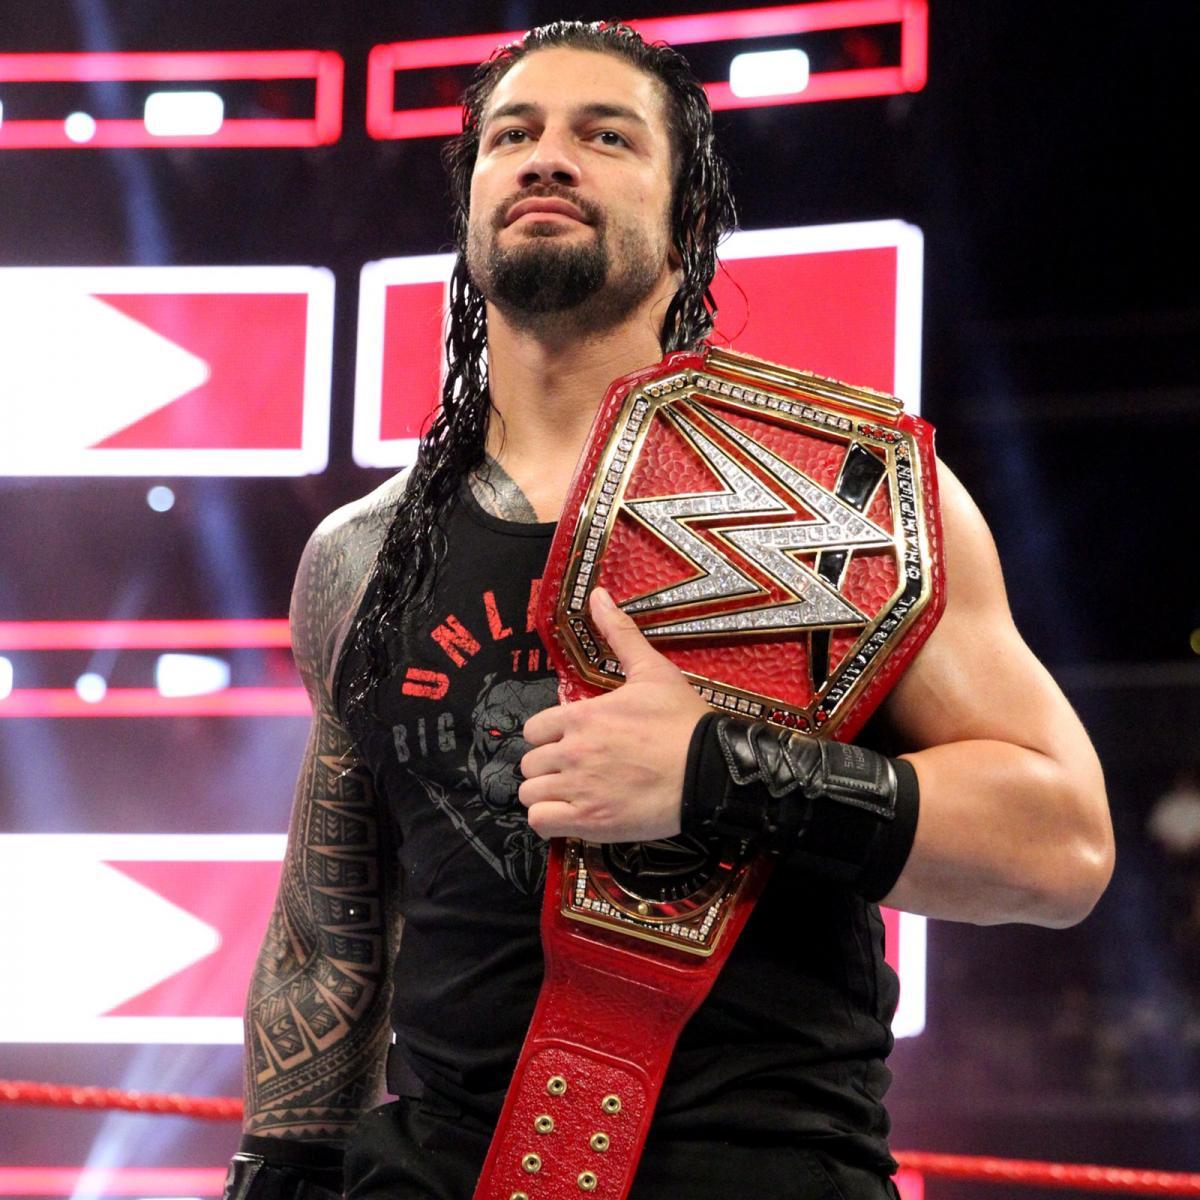 Roman Reigns to defend the Universal Title against Finn Bálor